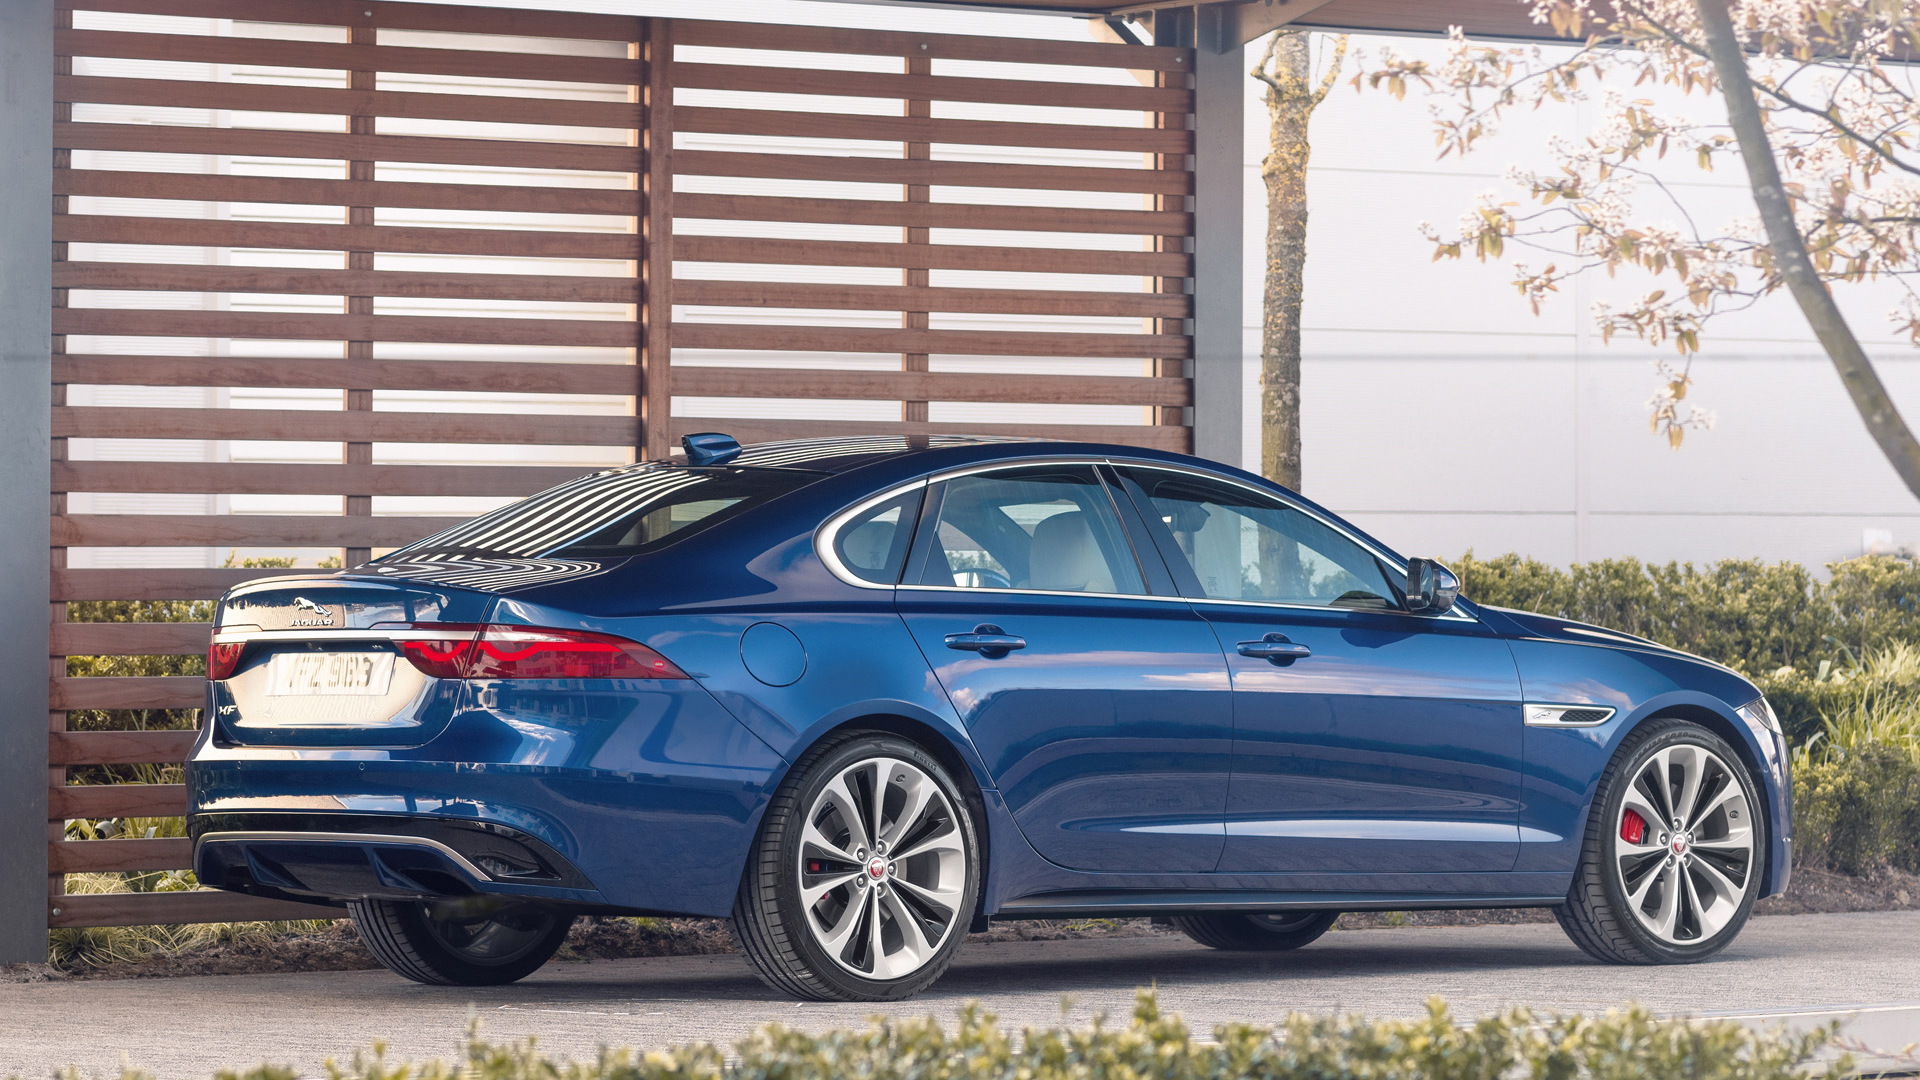 Preview: 2021 Jaguar XF arrives with sharper looks, new ...